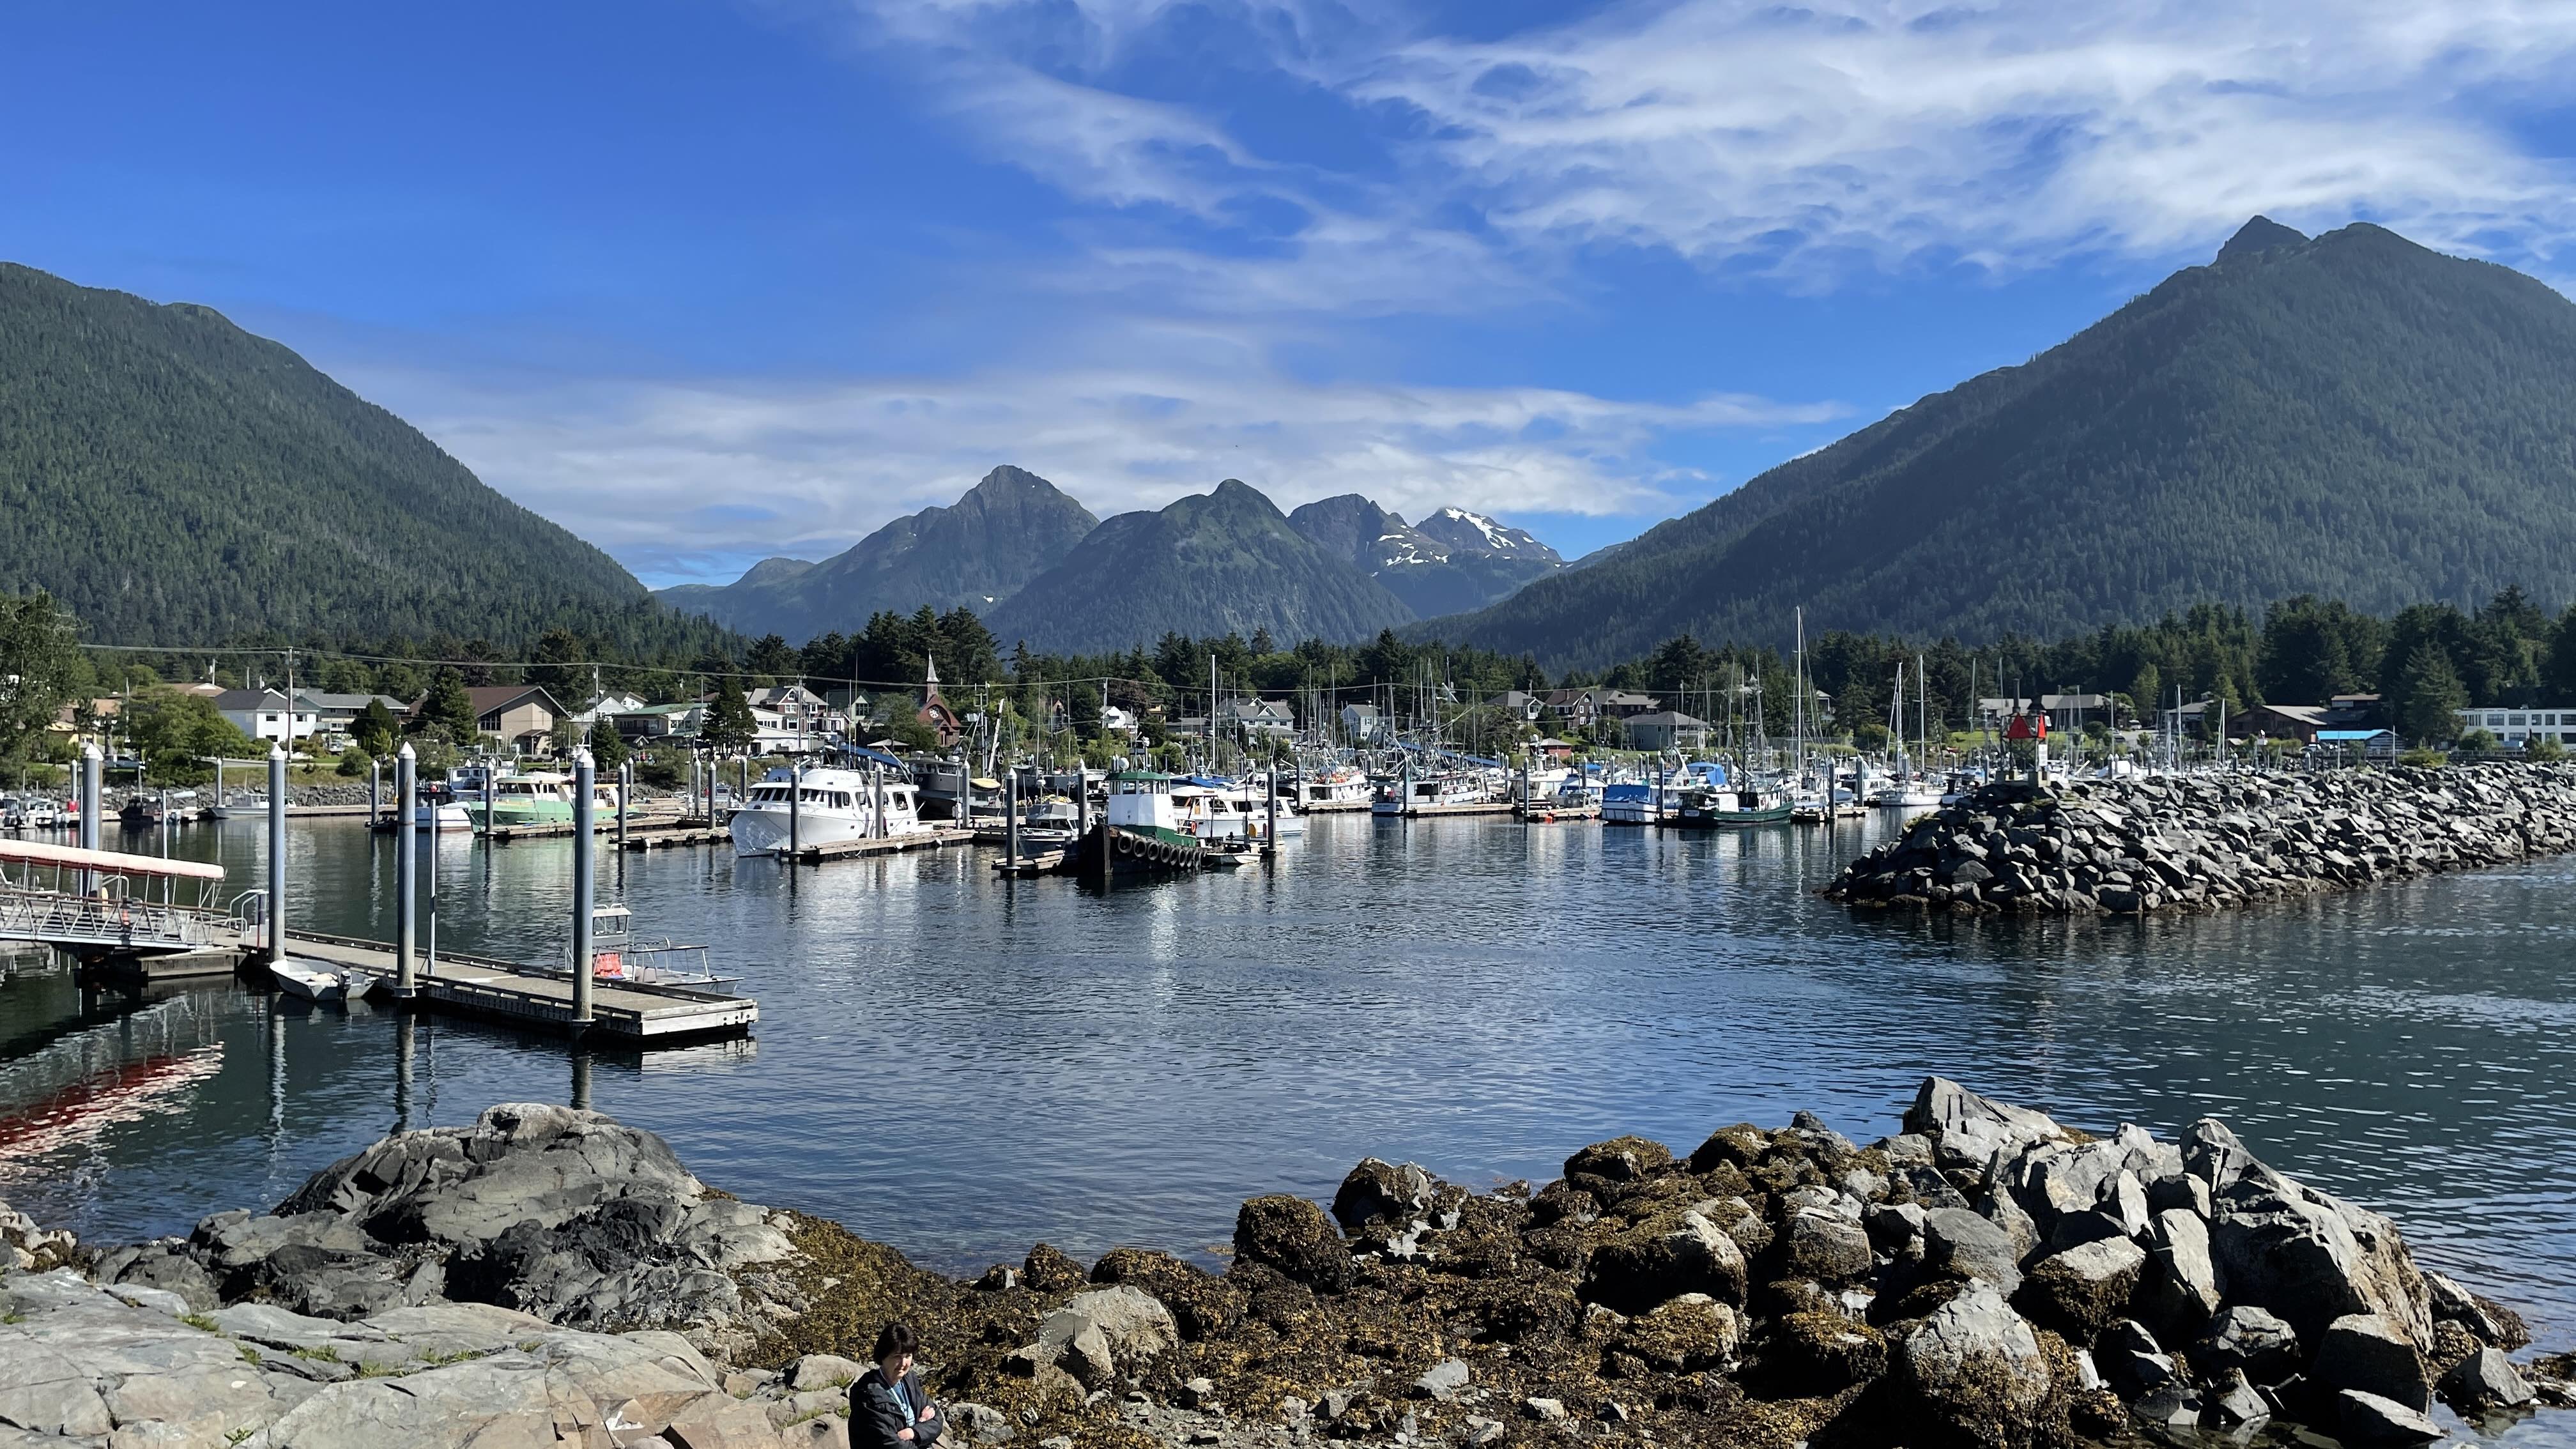 Boats docked at a rocky port with majestic mountains of Alaska in the background